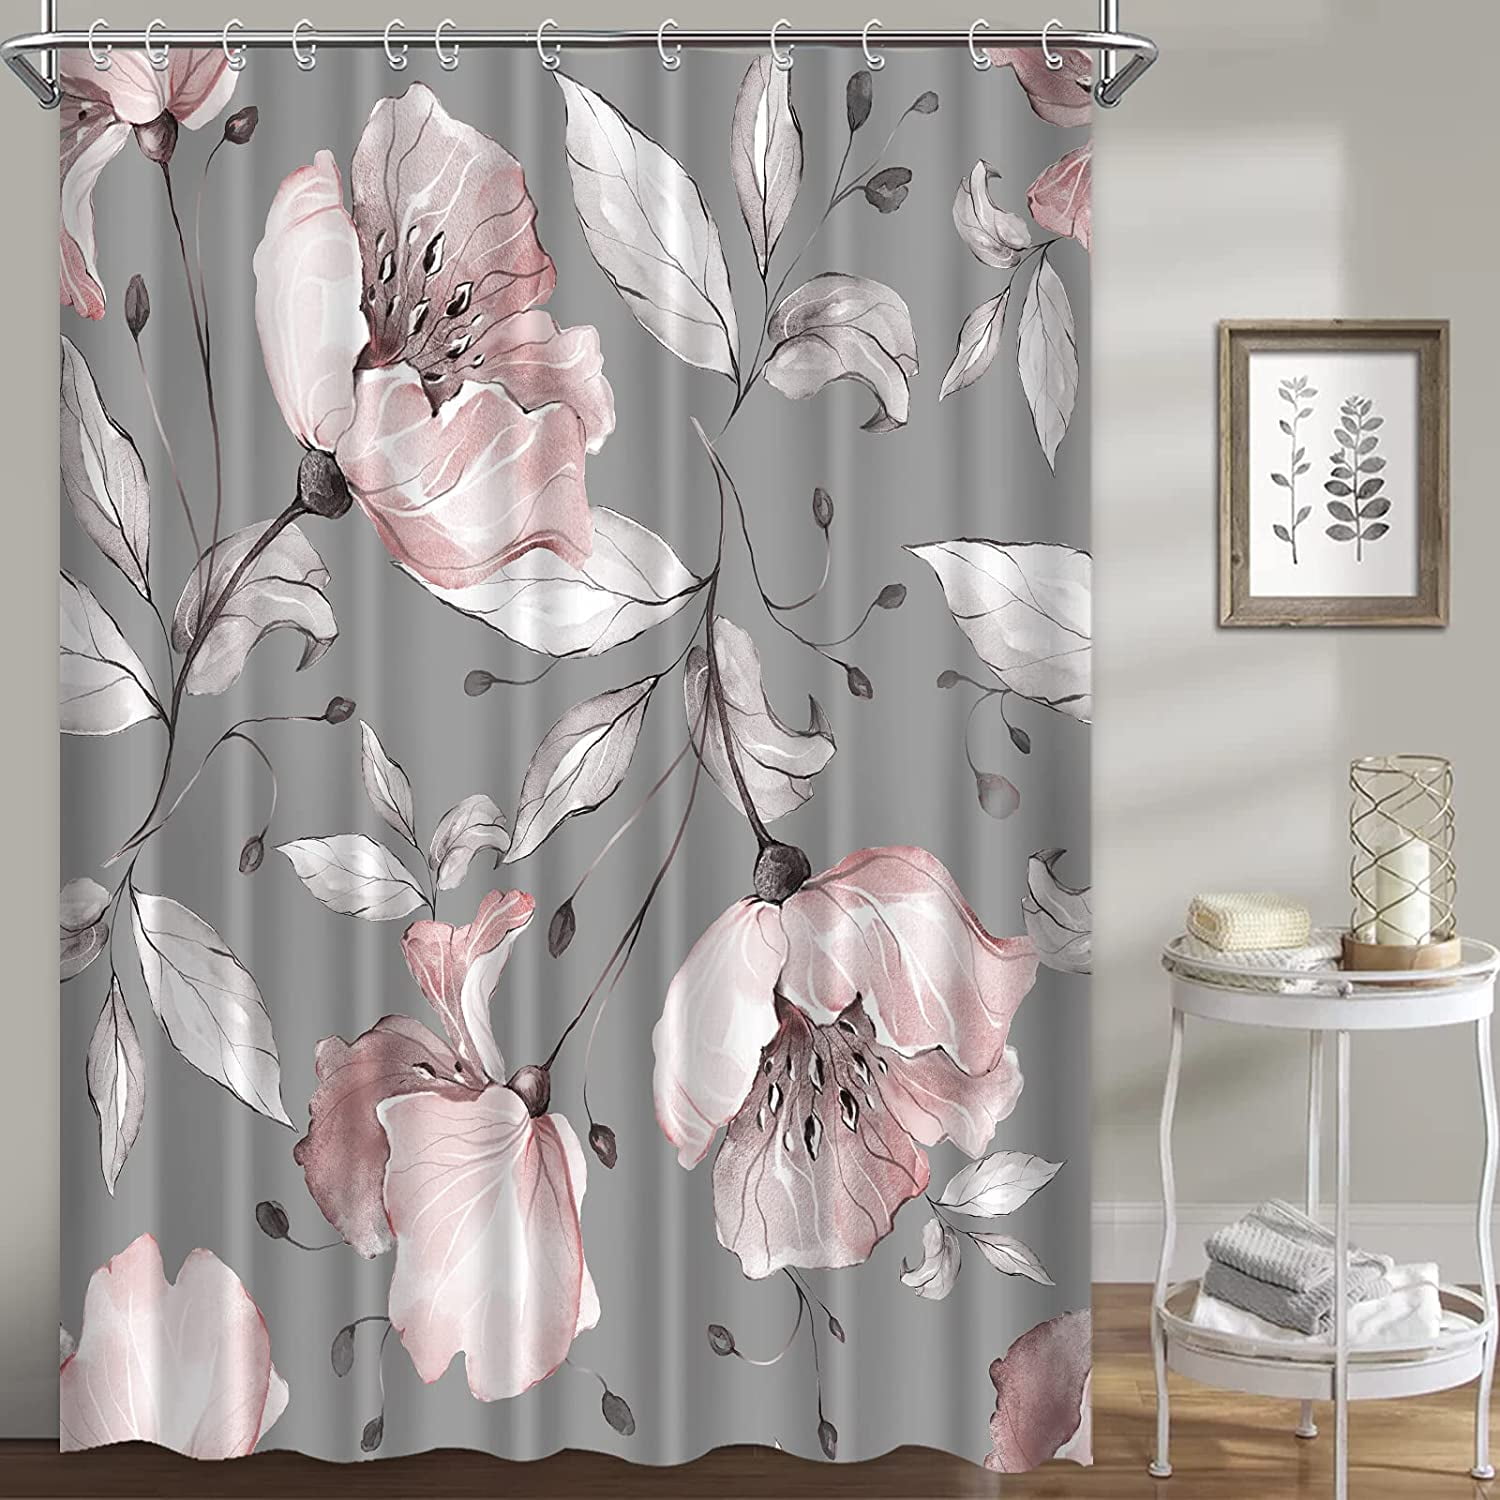 Details about   Spring Flower Shower Curtain for Bathroom,Blossom Floral Plants Fabric Curtains 